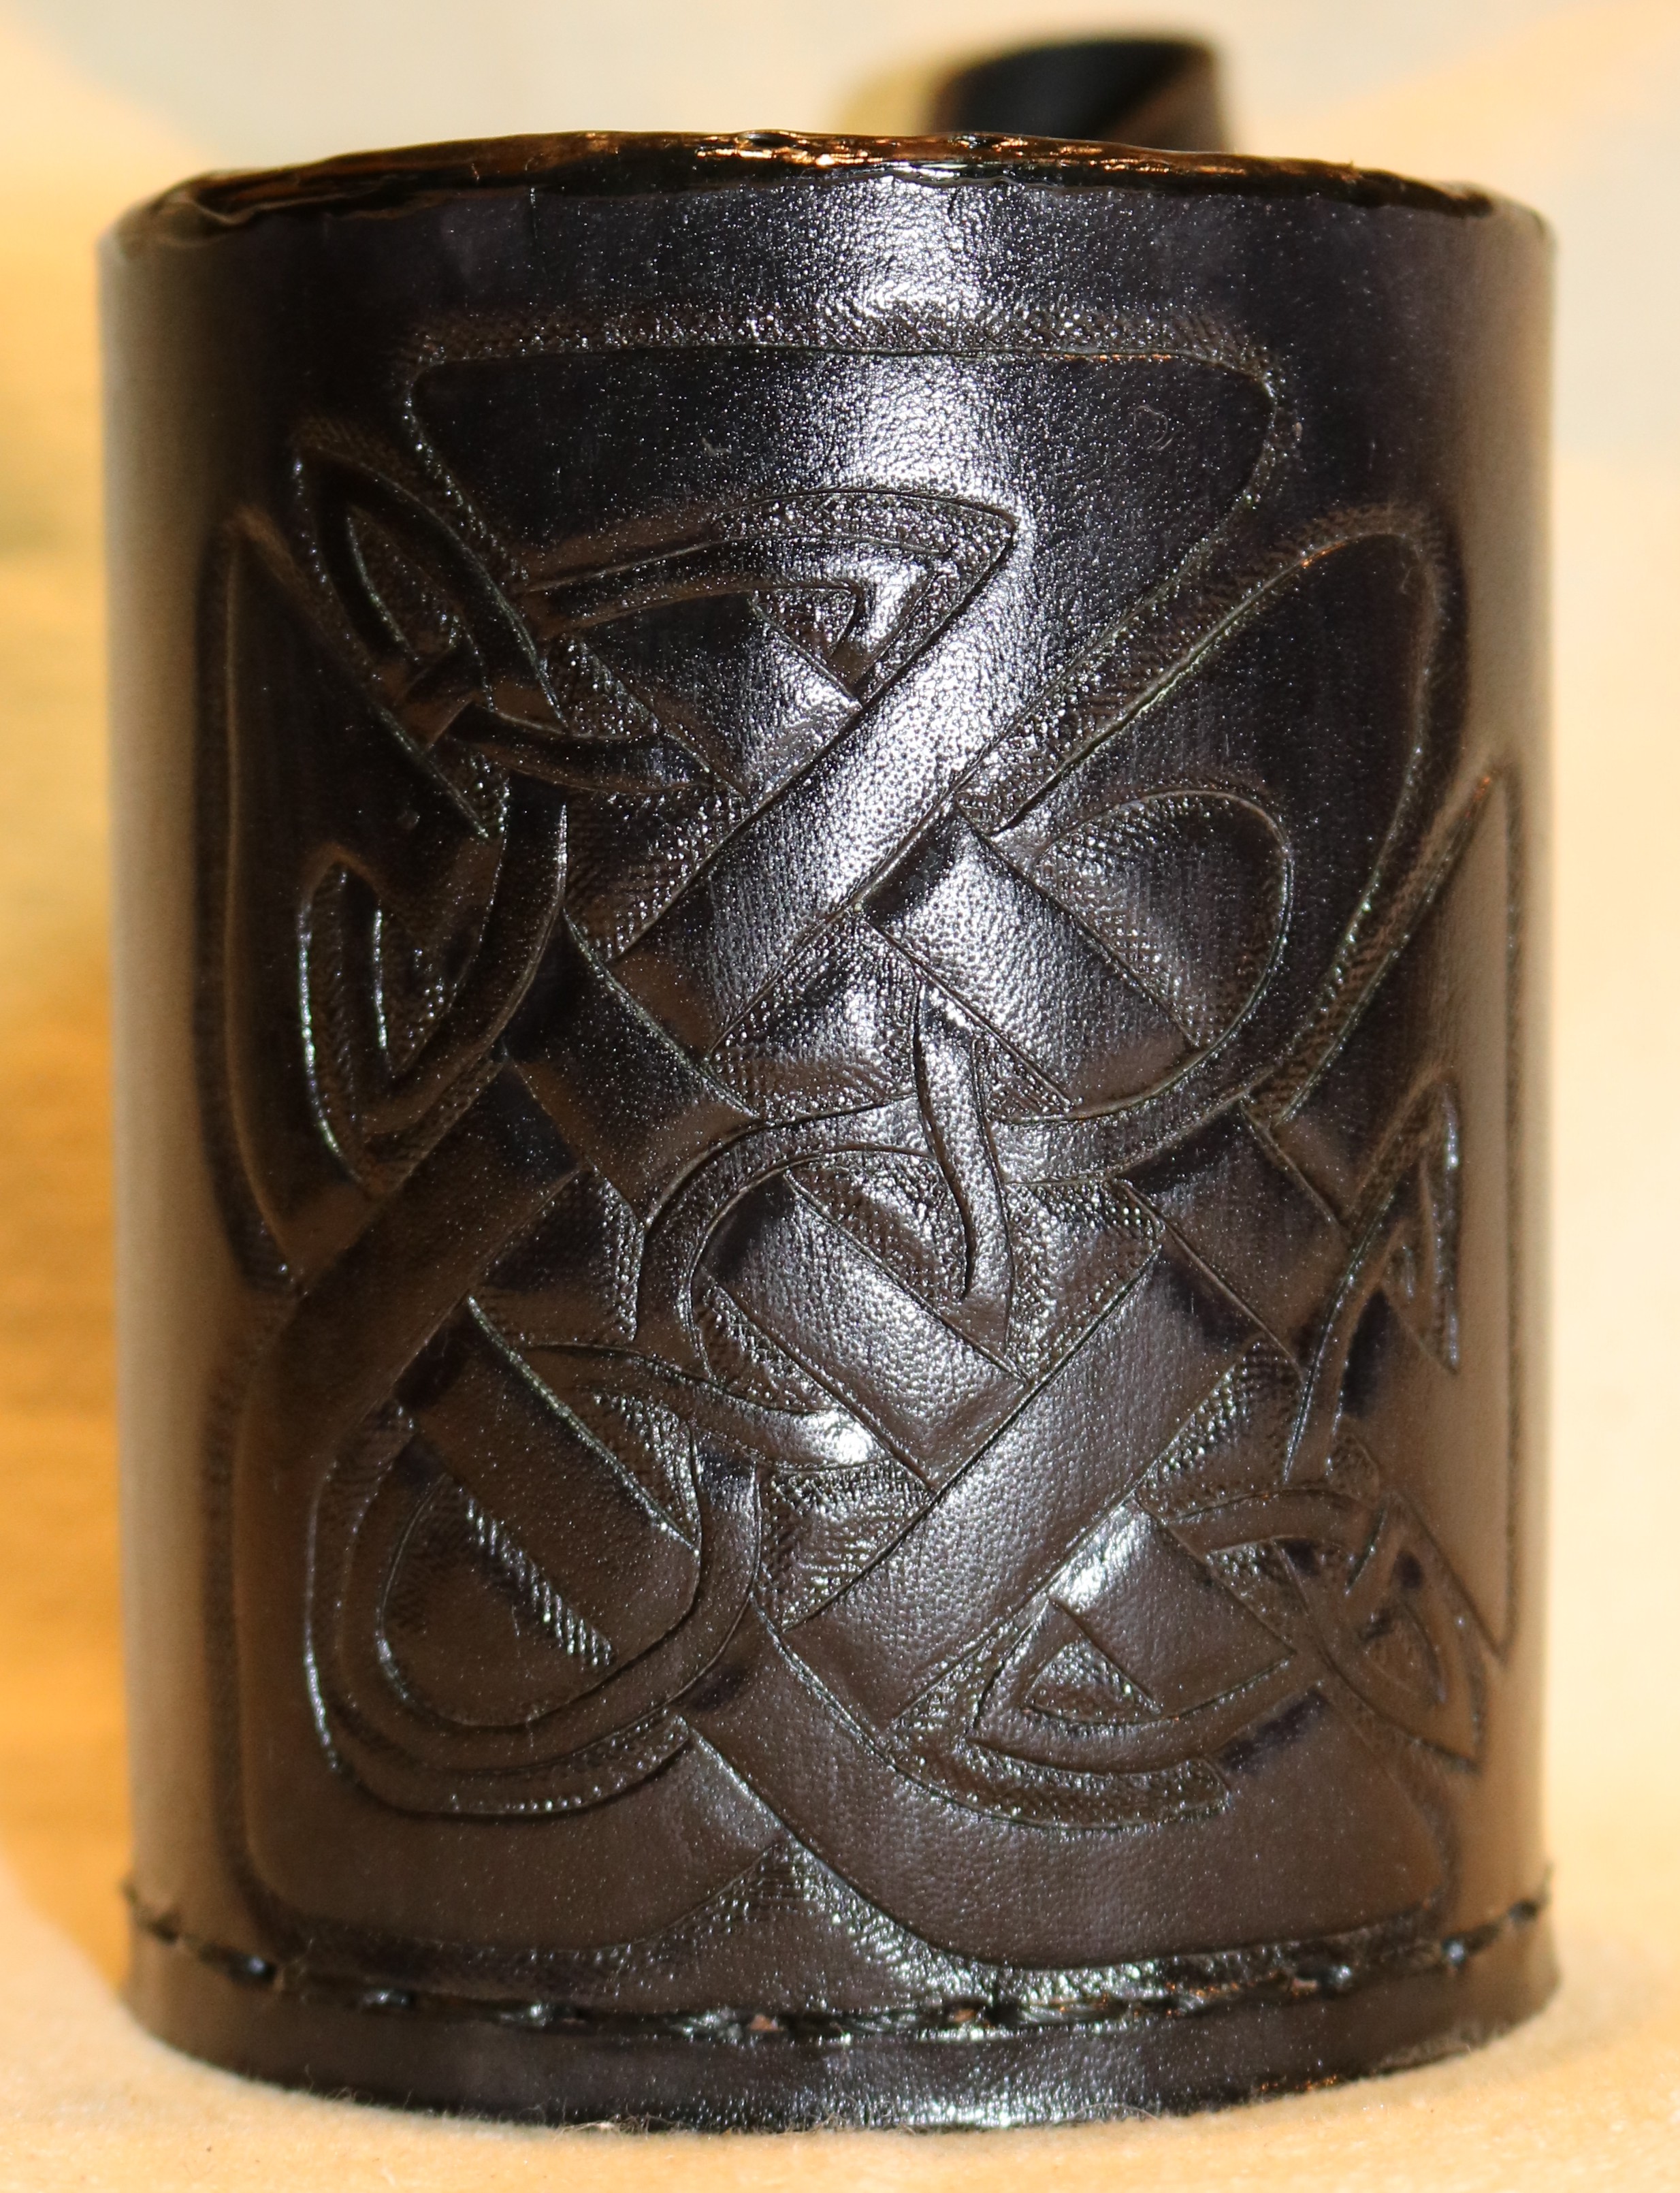 Celtic Knot Cup